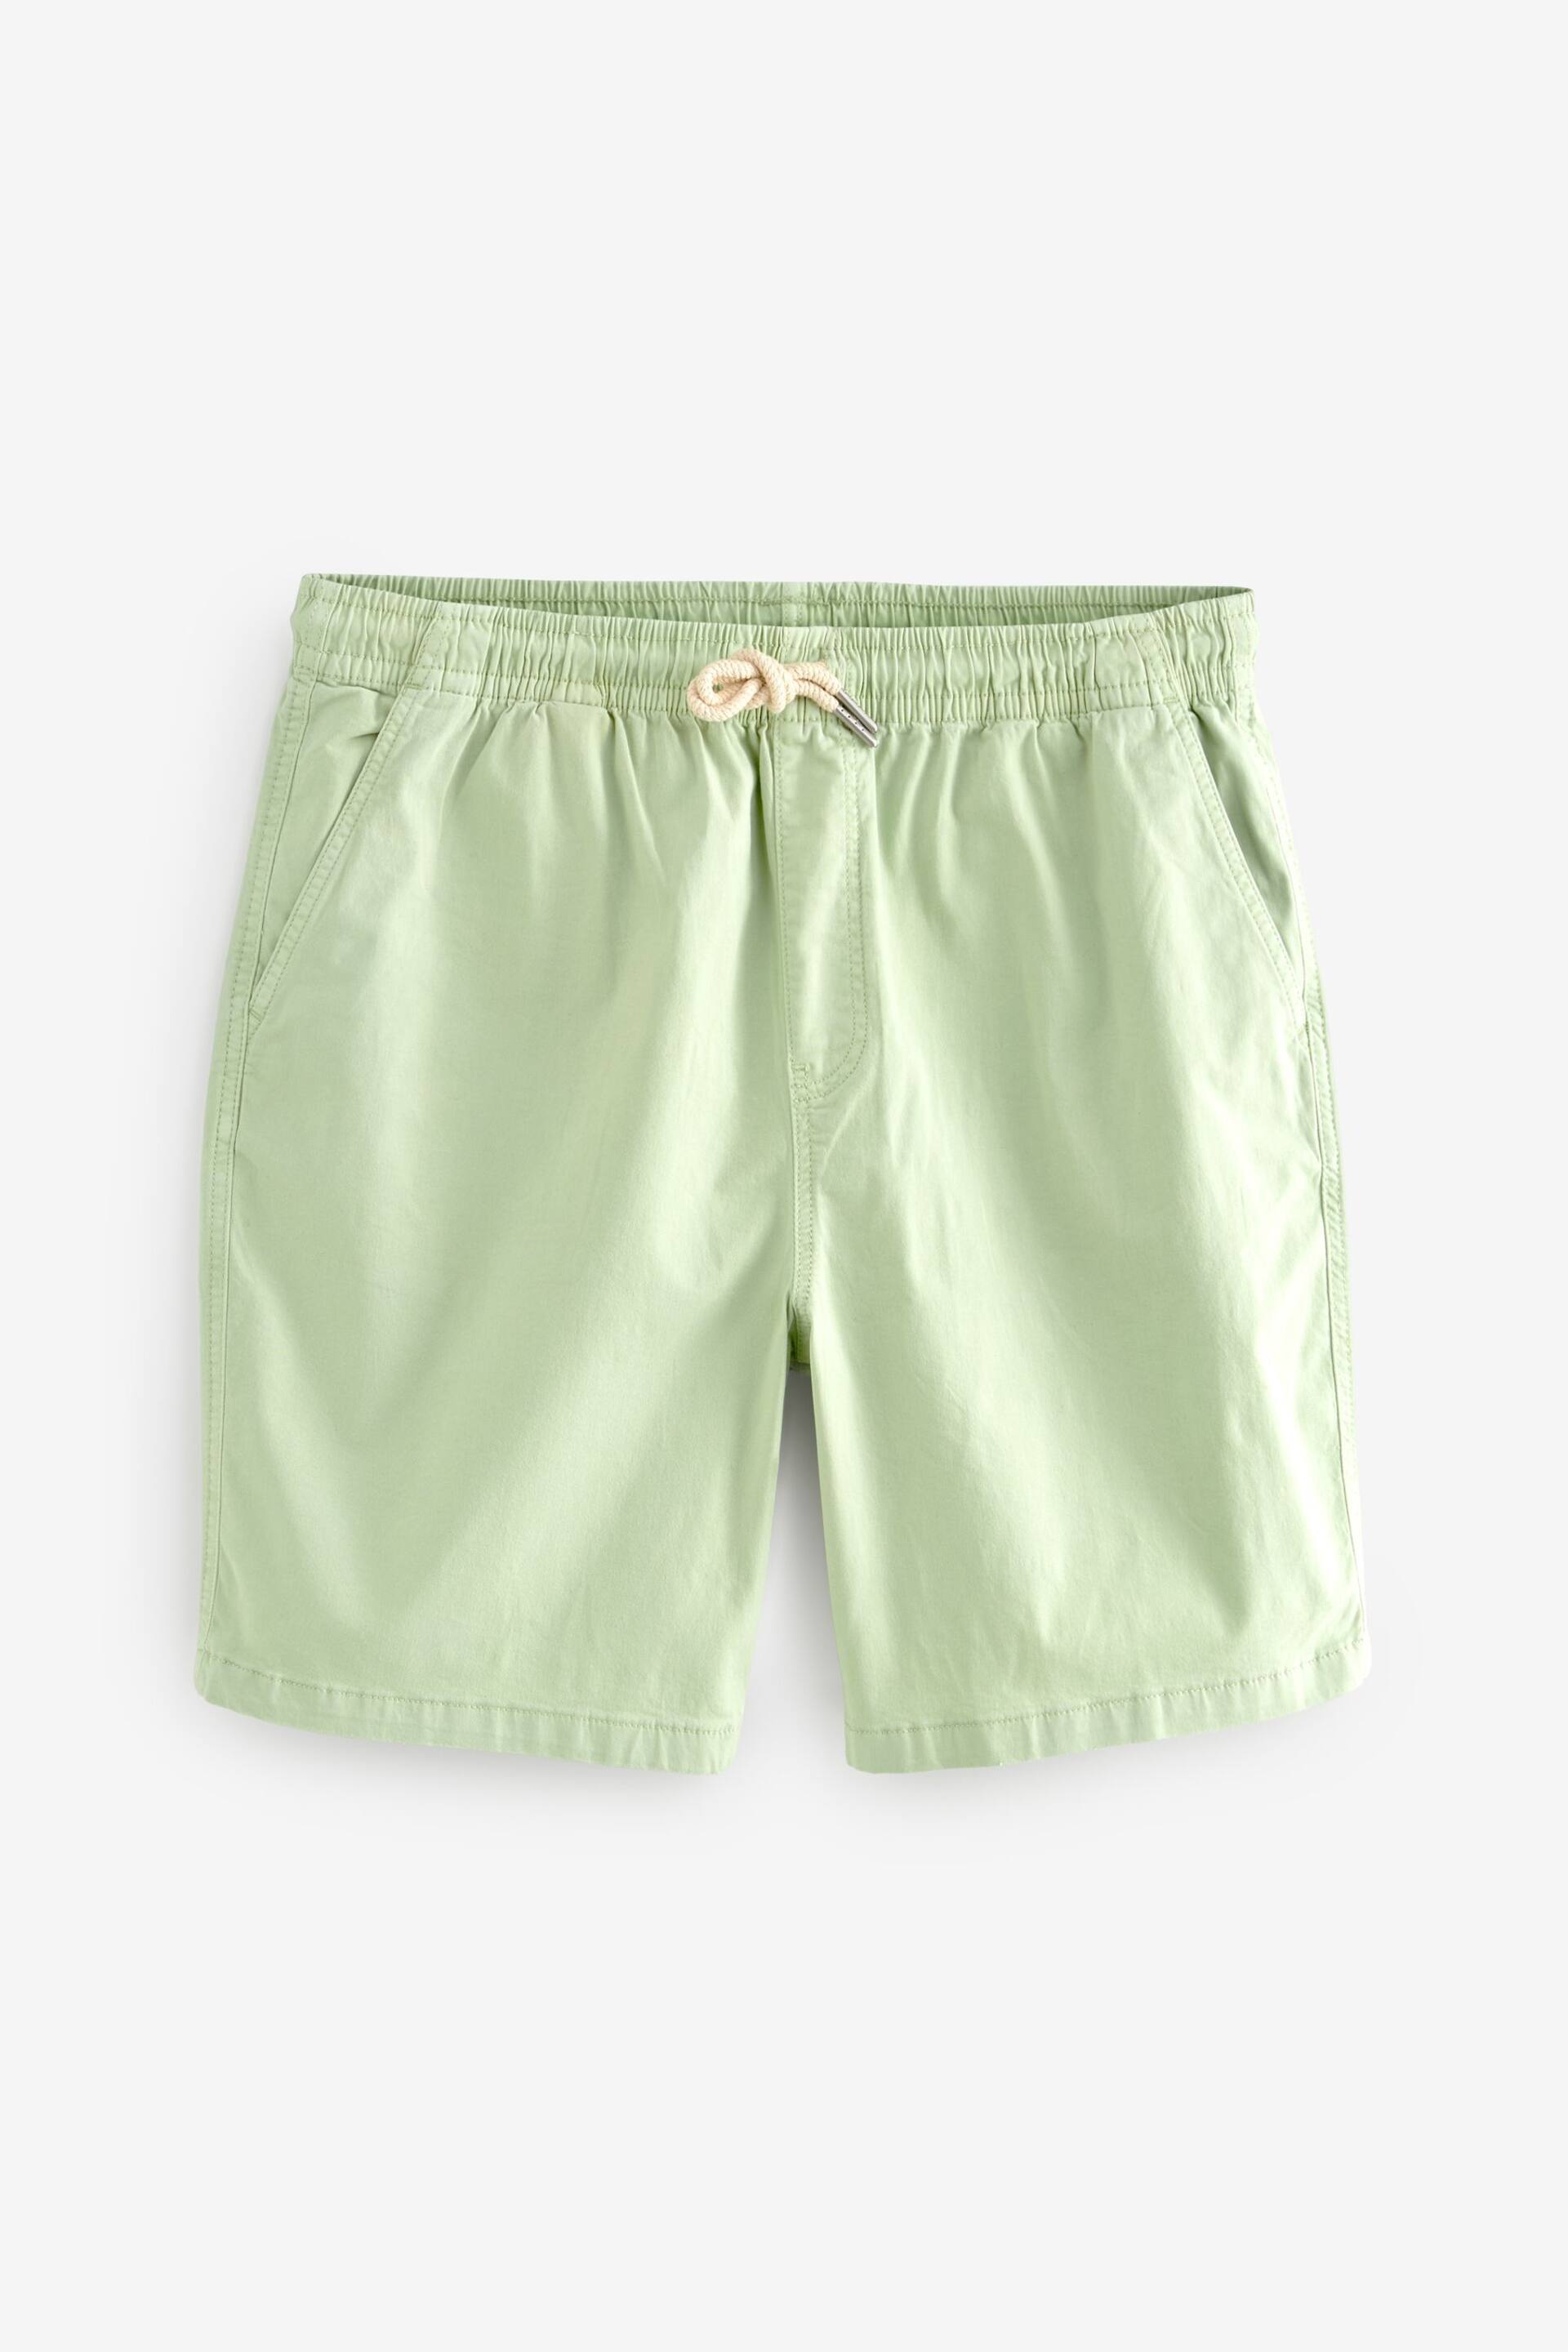 Lime Green Washed Cotton Elasticated Waist Shorts - Image 5 of 9